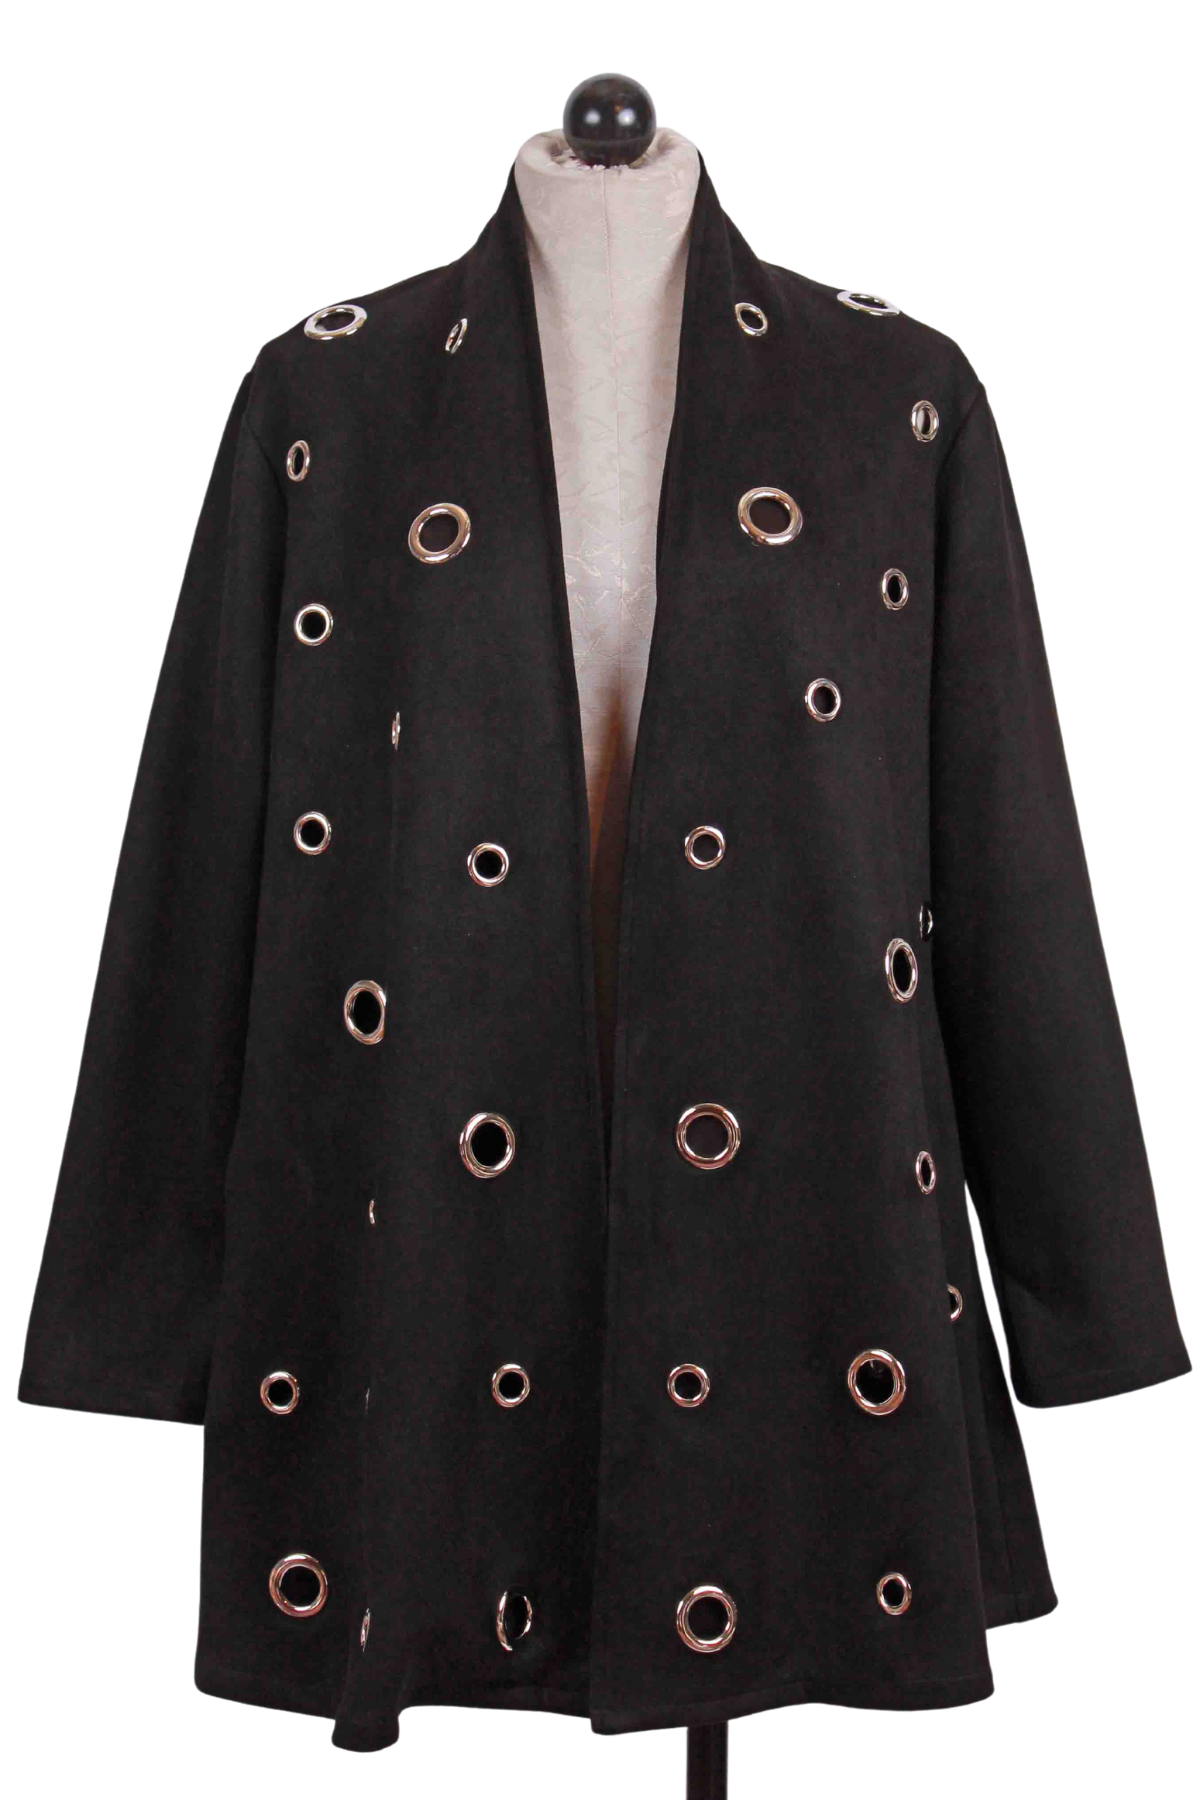 Black Open Front Faux Suede Jacket with Grommets by Radzoli